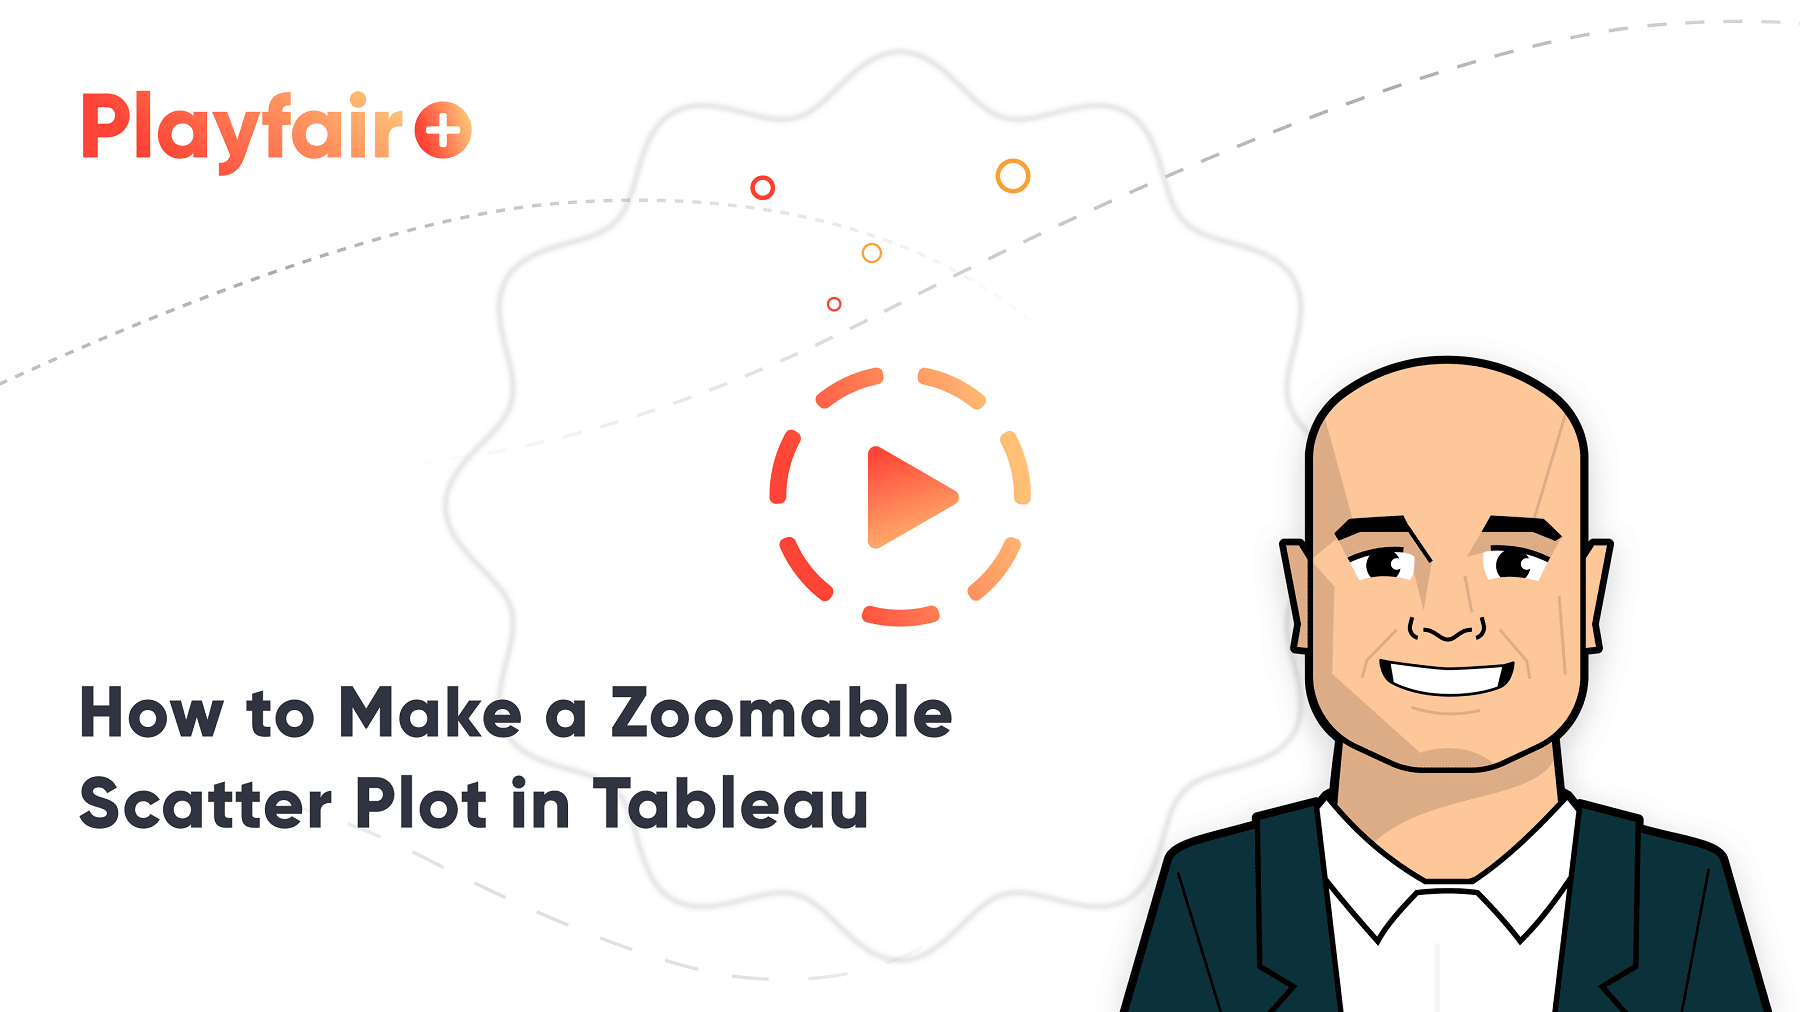 How to Make a Zoomable Scatter Plot in Tableau